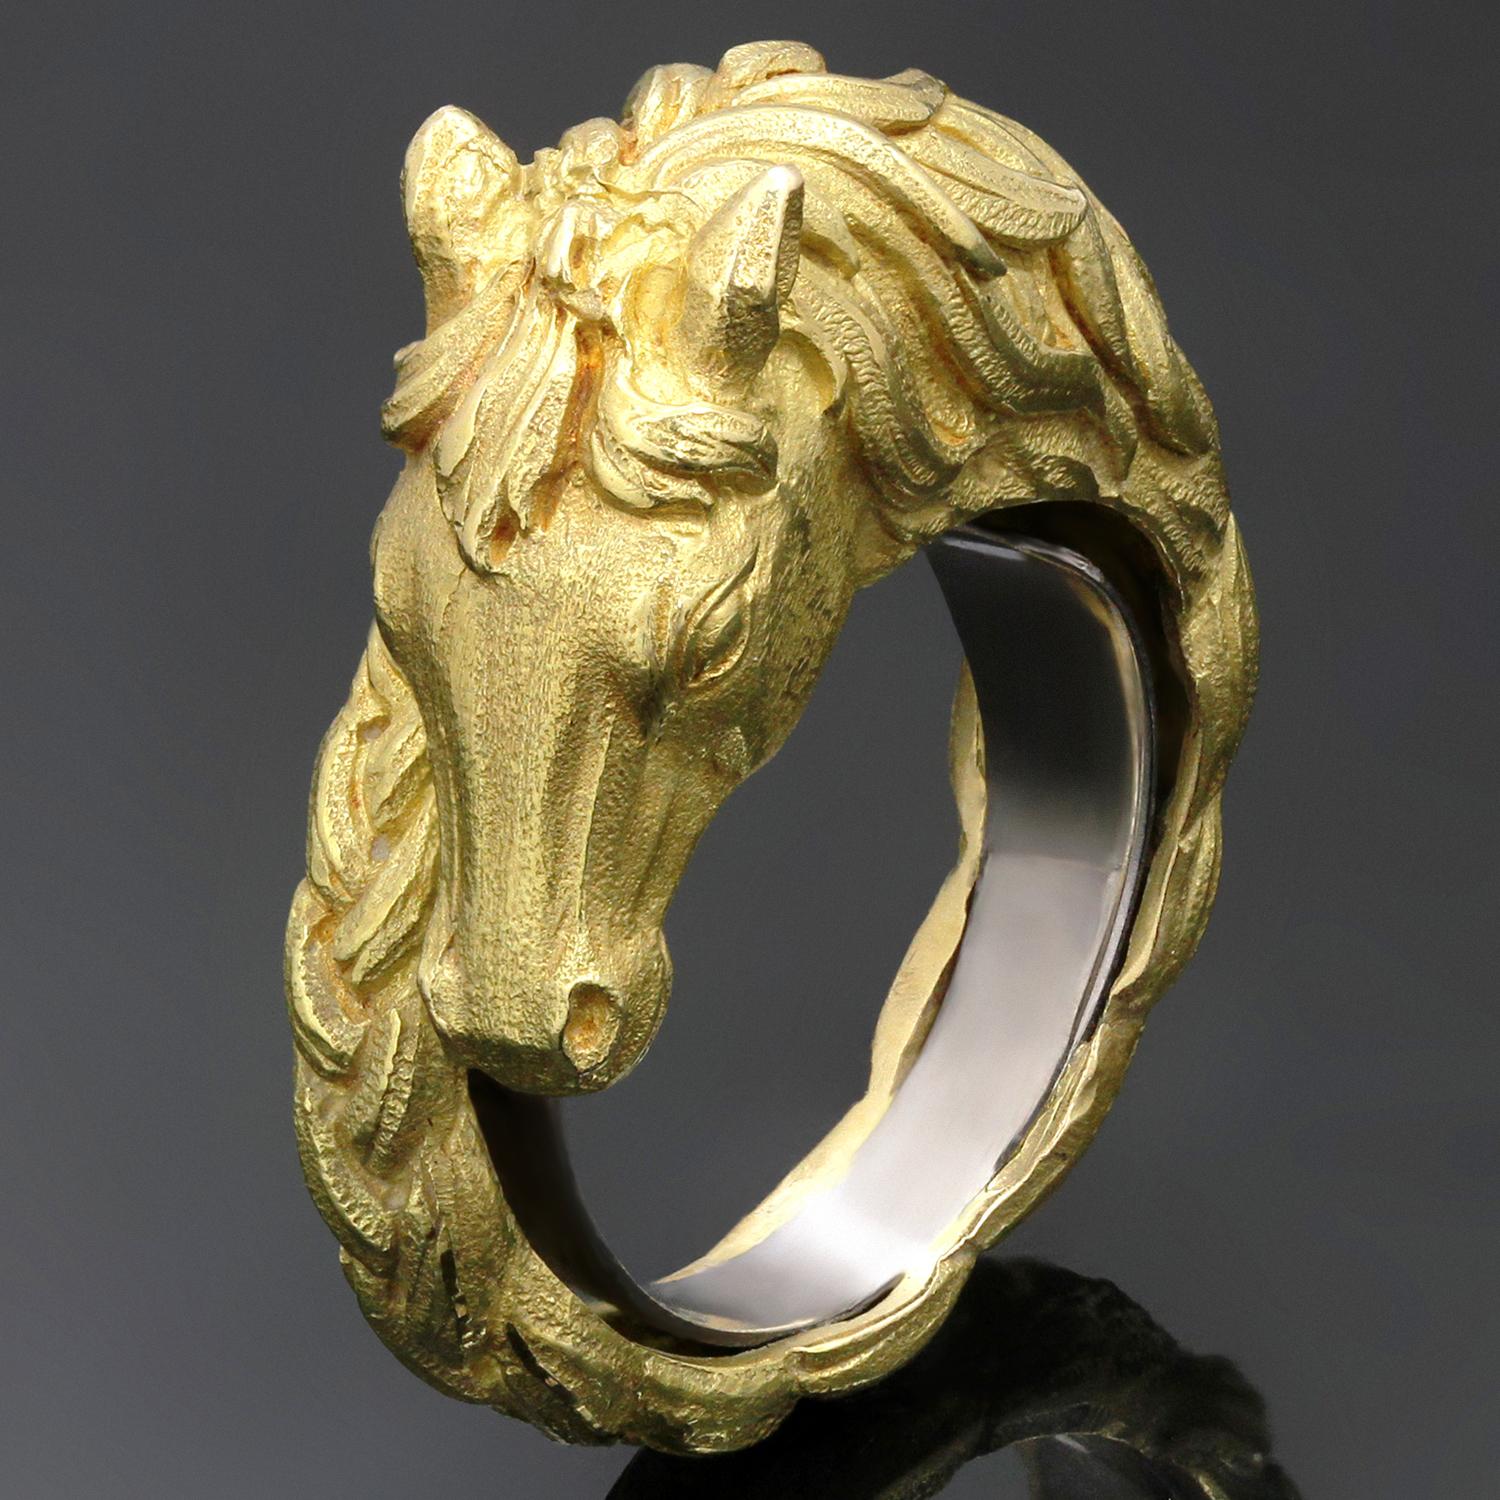 This extremely rare authentic Hermes ring features a gorgeous horse head design with a braided band crafted in textured 18k yellow gold. The ring has an inner guard for an adjustable ring US size of 5.5 to size 7. Completed with Hermes Paris French